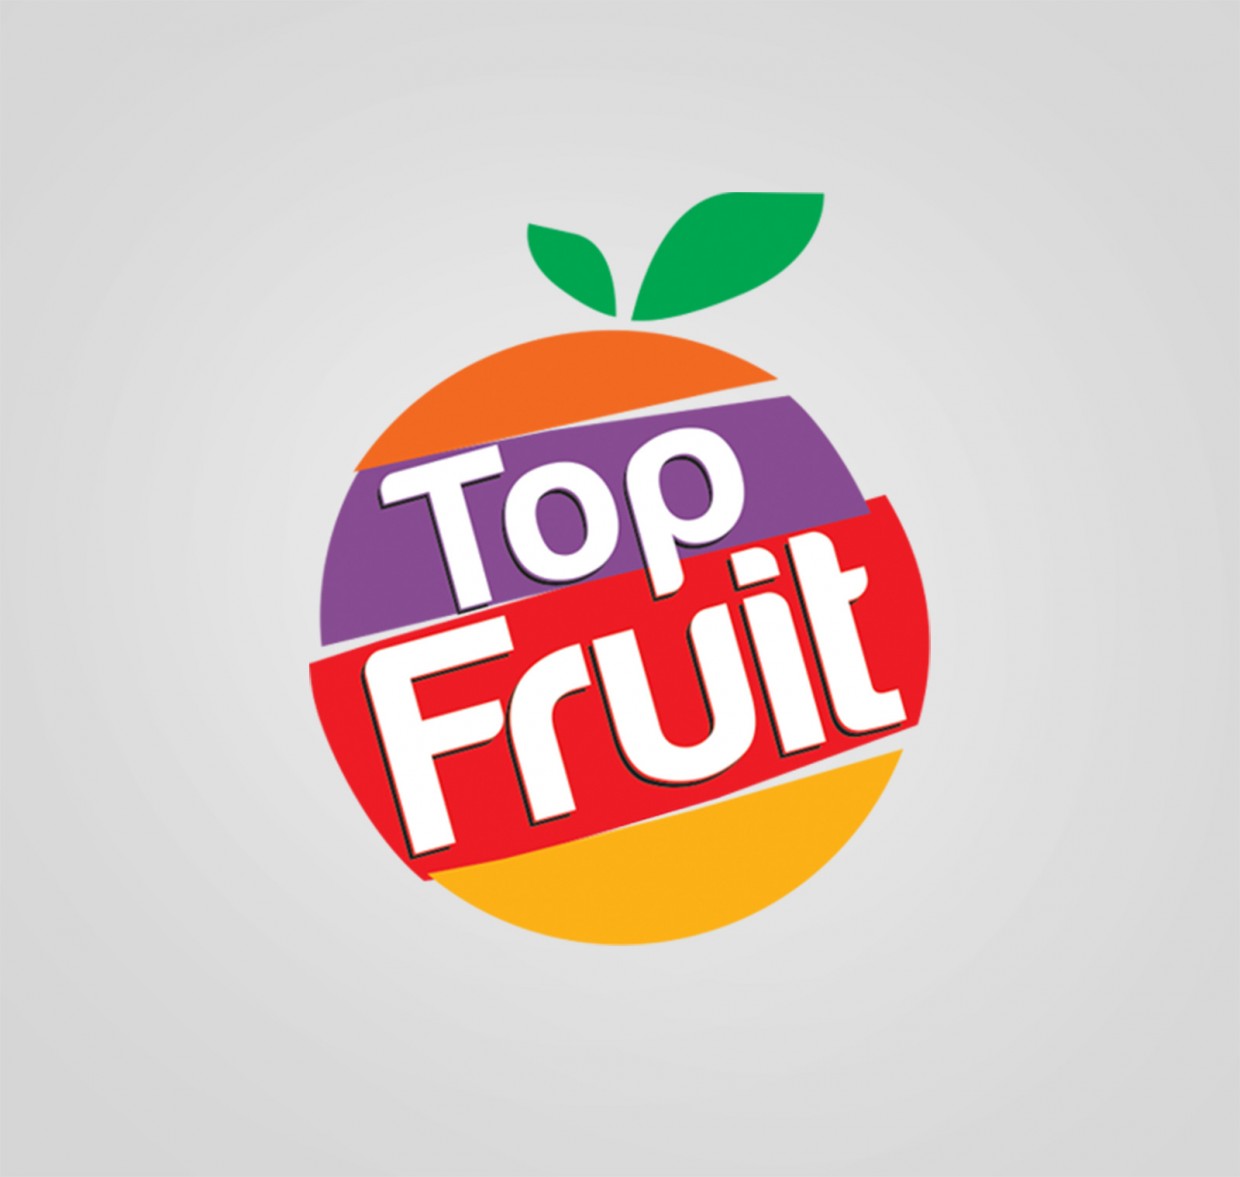 Top Fruit product logo design by Packaging Design' s Corporate identity creations